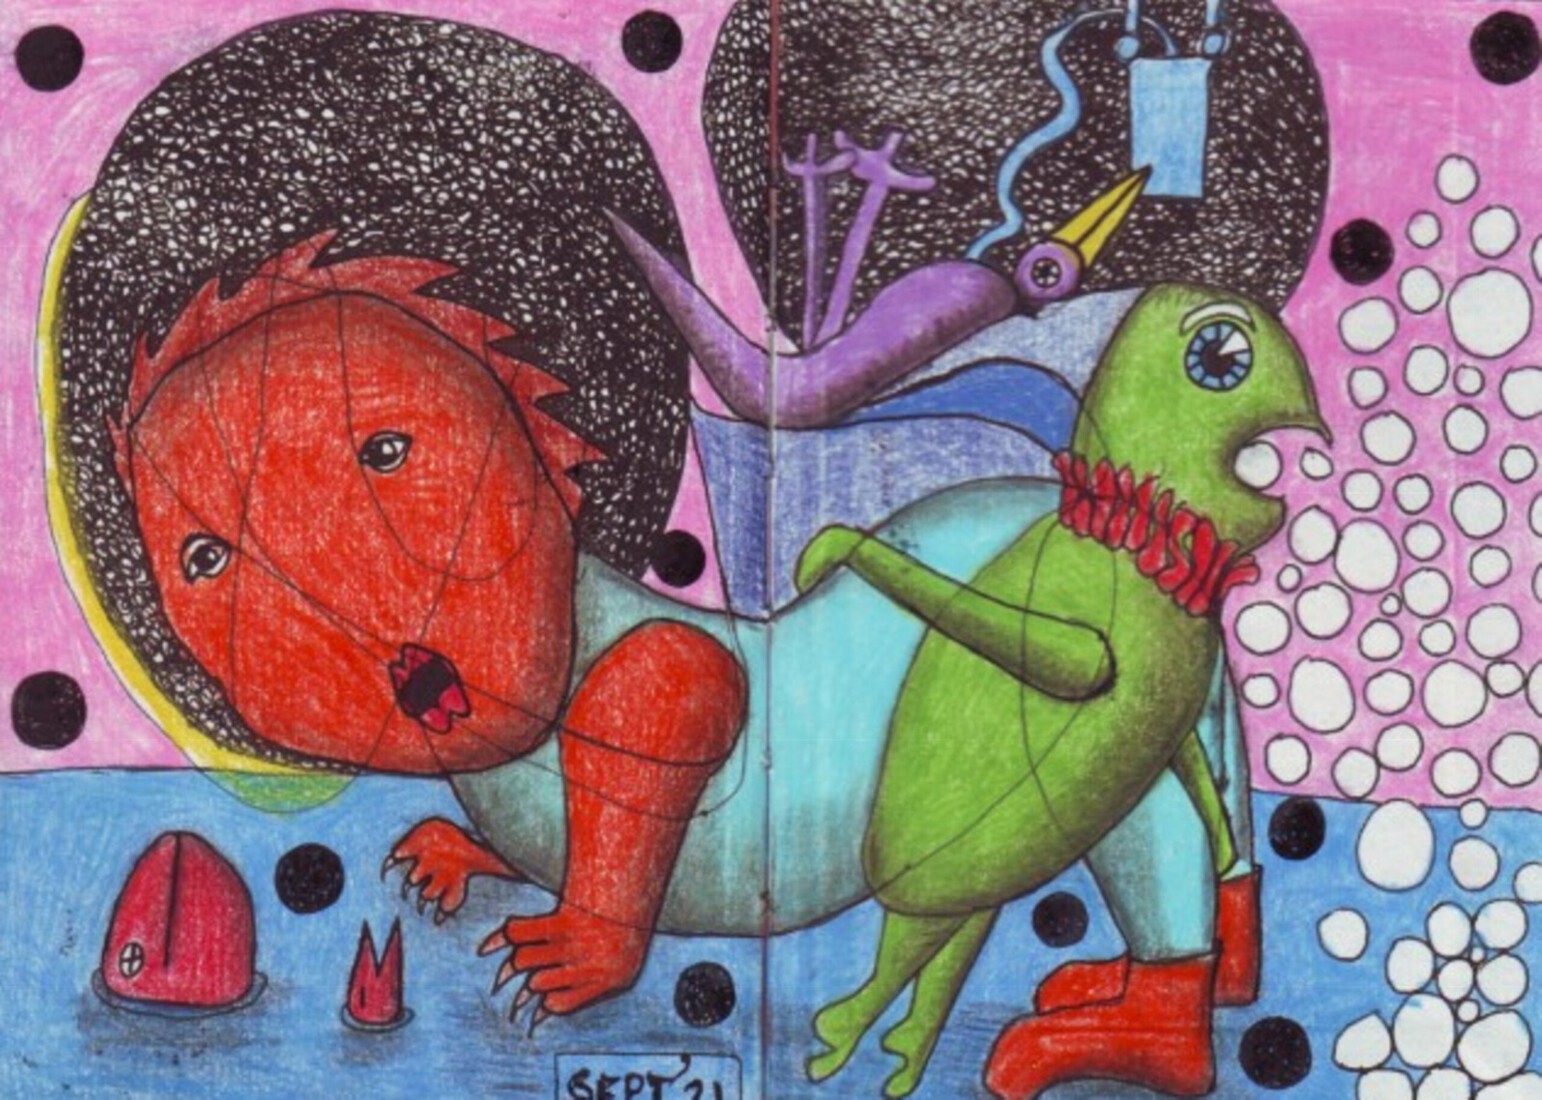 OUTSIDERART: CORONAPANDEMIE: Beddrawing nr. 3550; We'll survive these shadow times